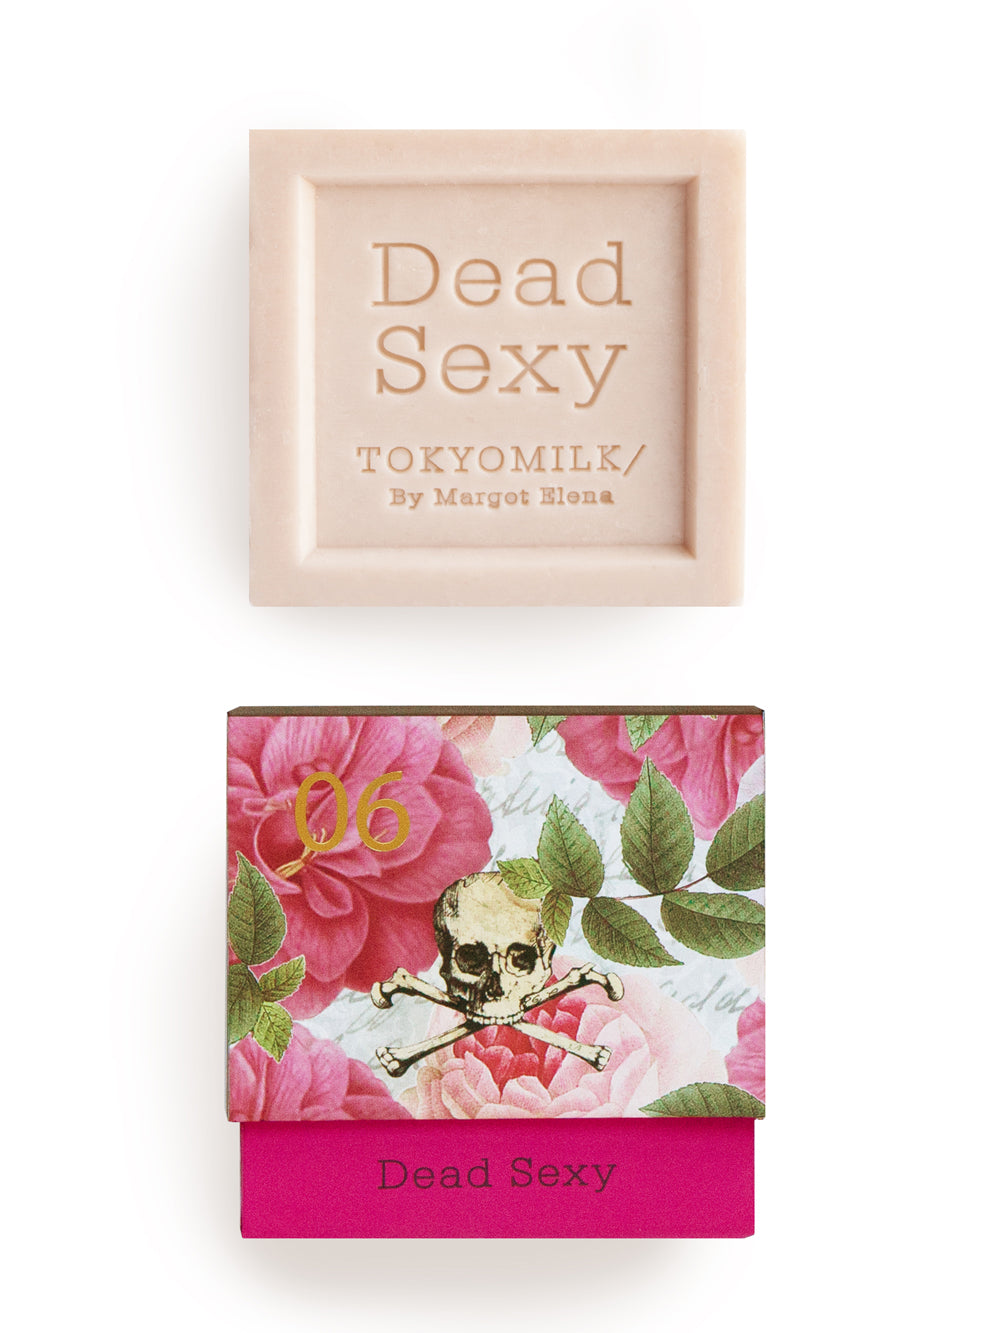 Two "TokyoMilk Dead Sexy" products by Margot Elena: a pink-framed bar of French Soap and a floral box with a skull design on the cover.